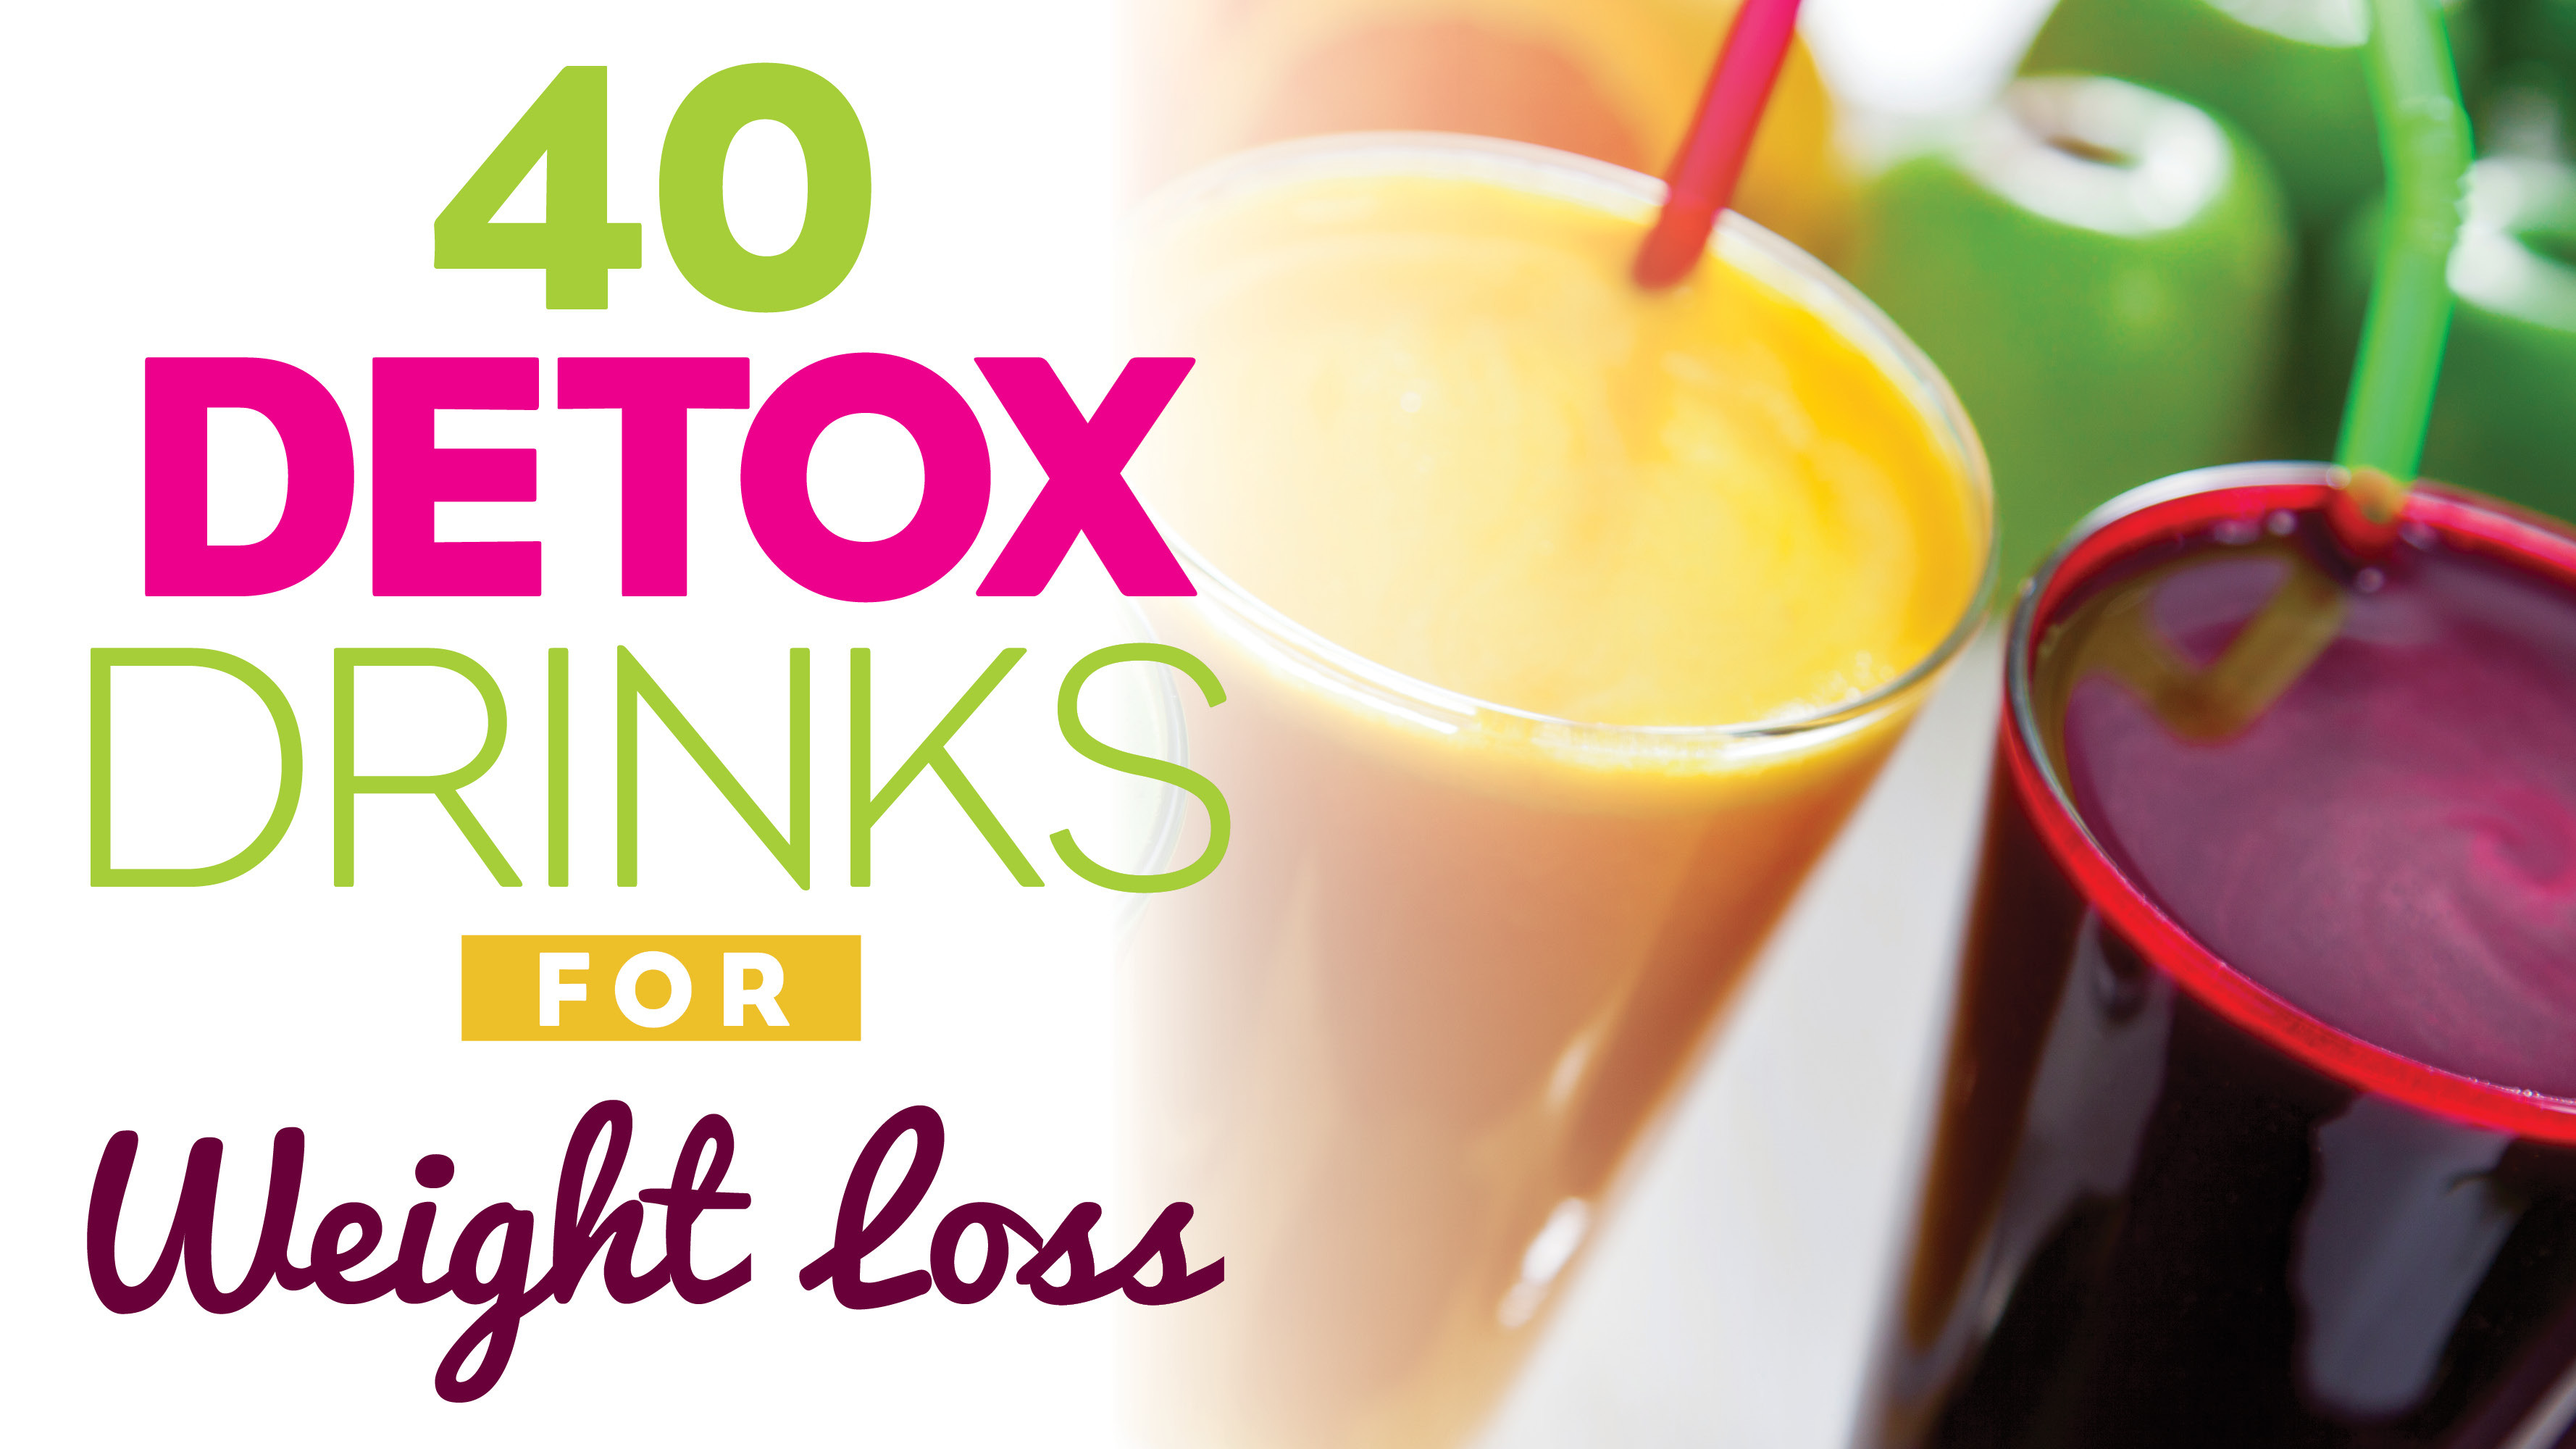 Weight Loss Detox Drink Recipes
 40 Detox Drinks for Weight Loss